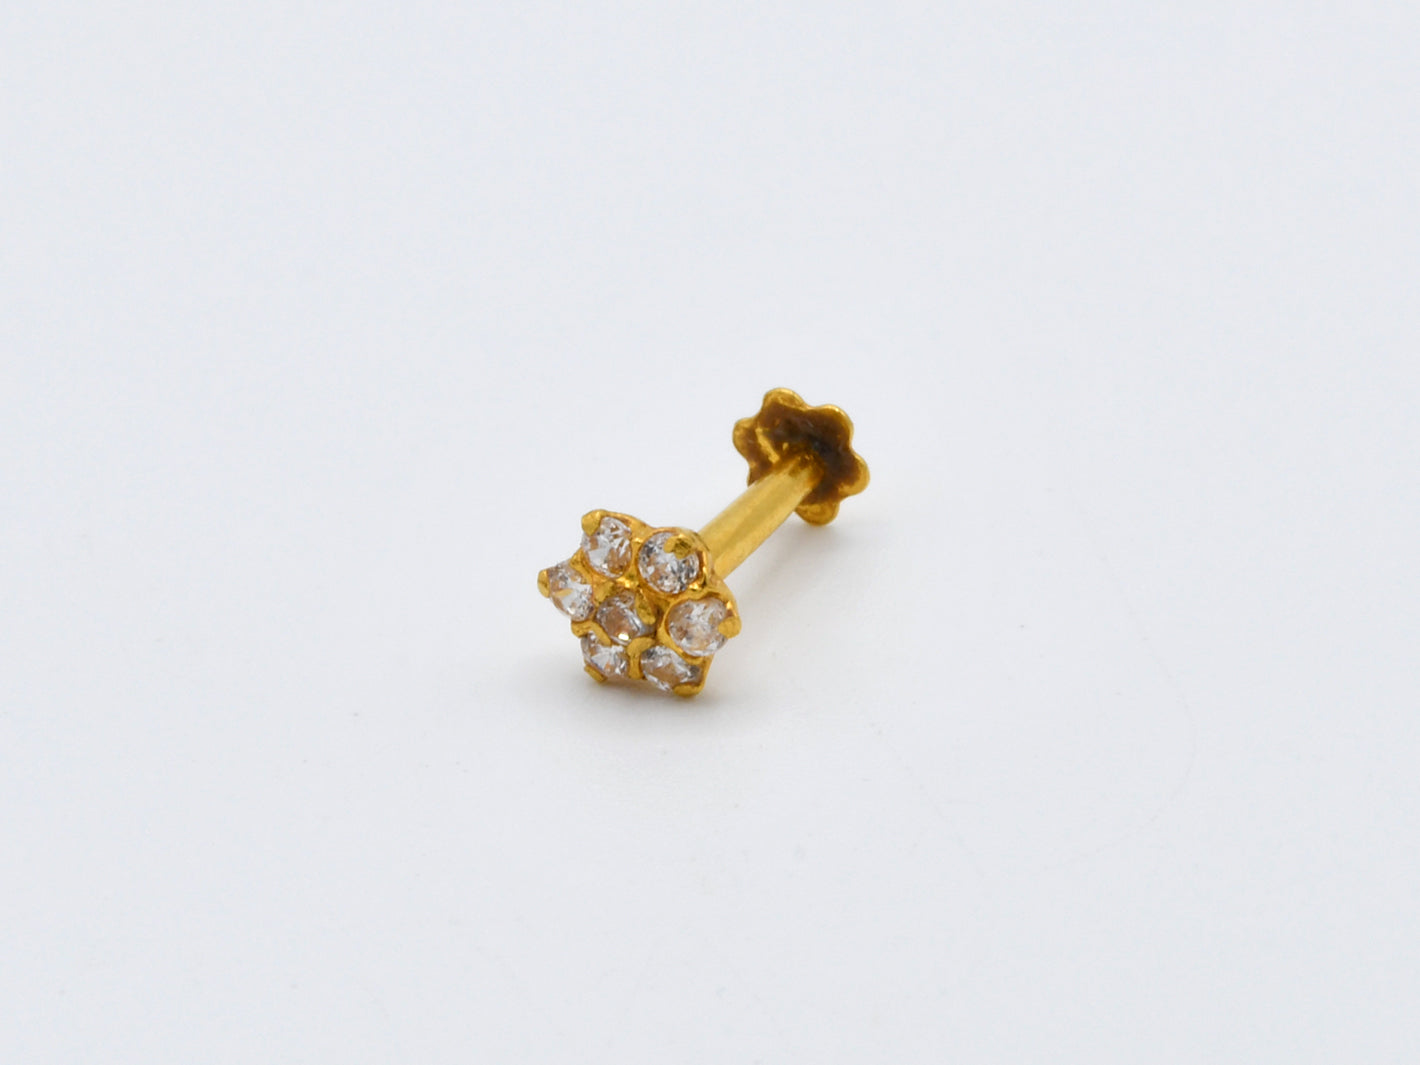 22ct Gold CZ Nose Pin - 4.5 mm - Roop Darshan